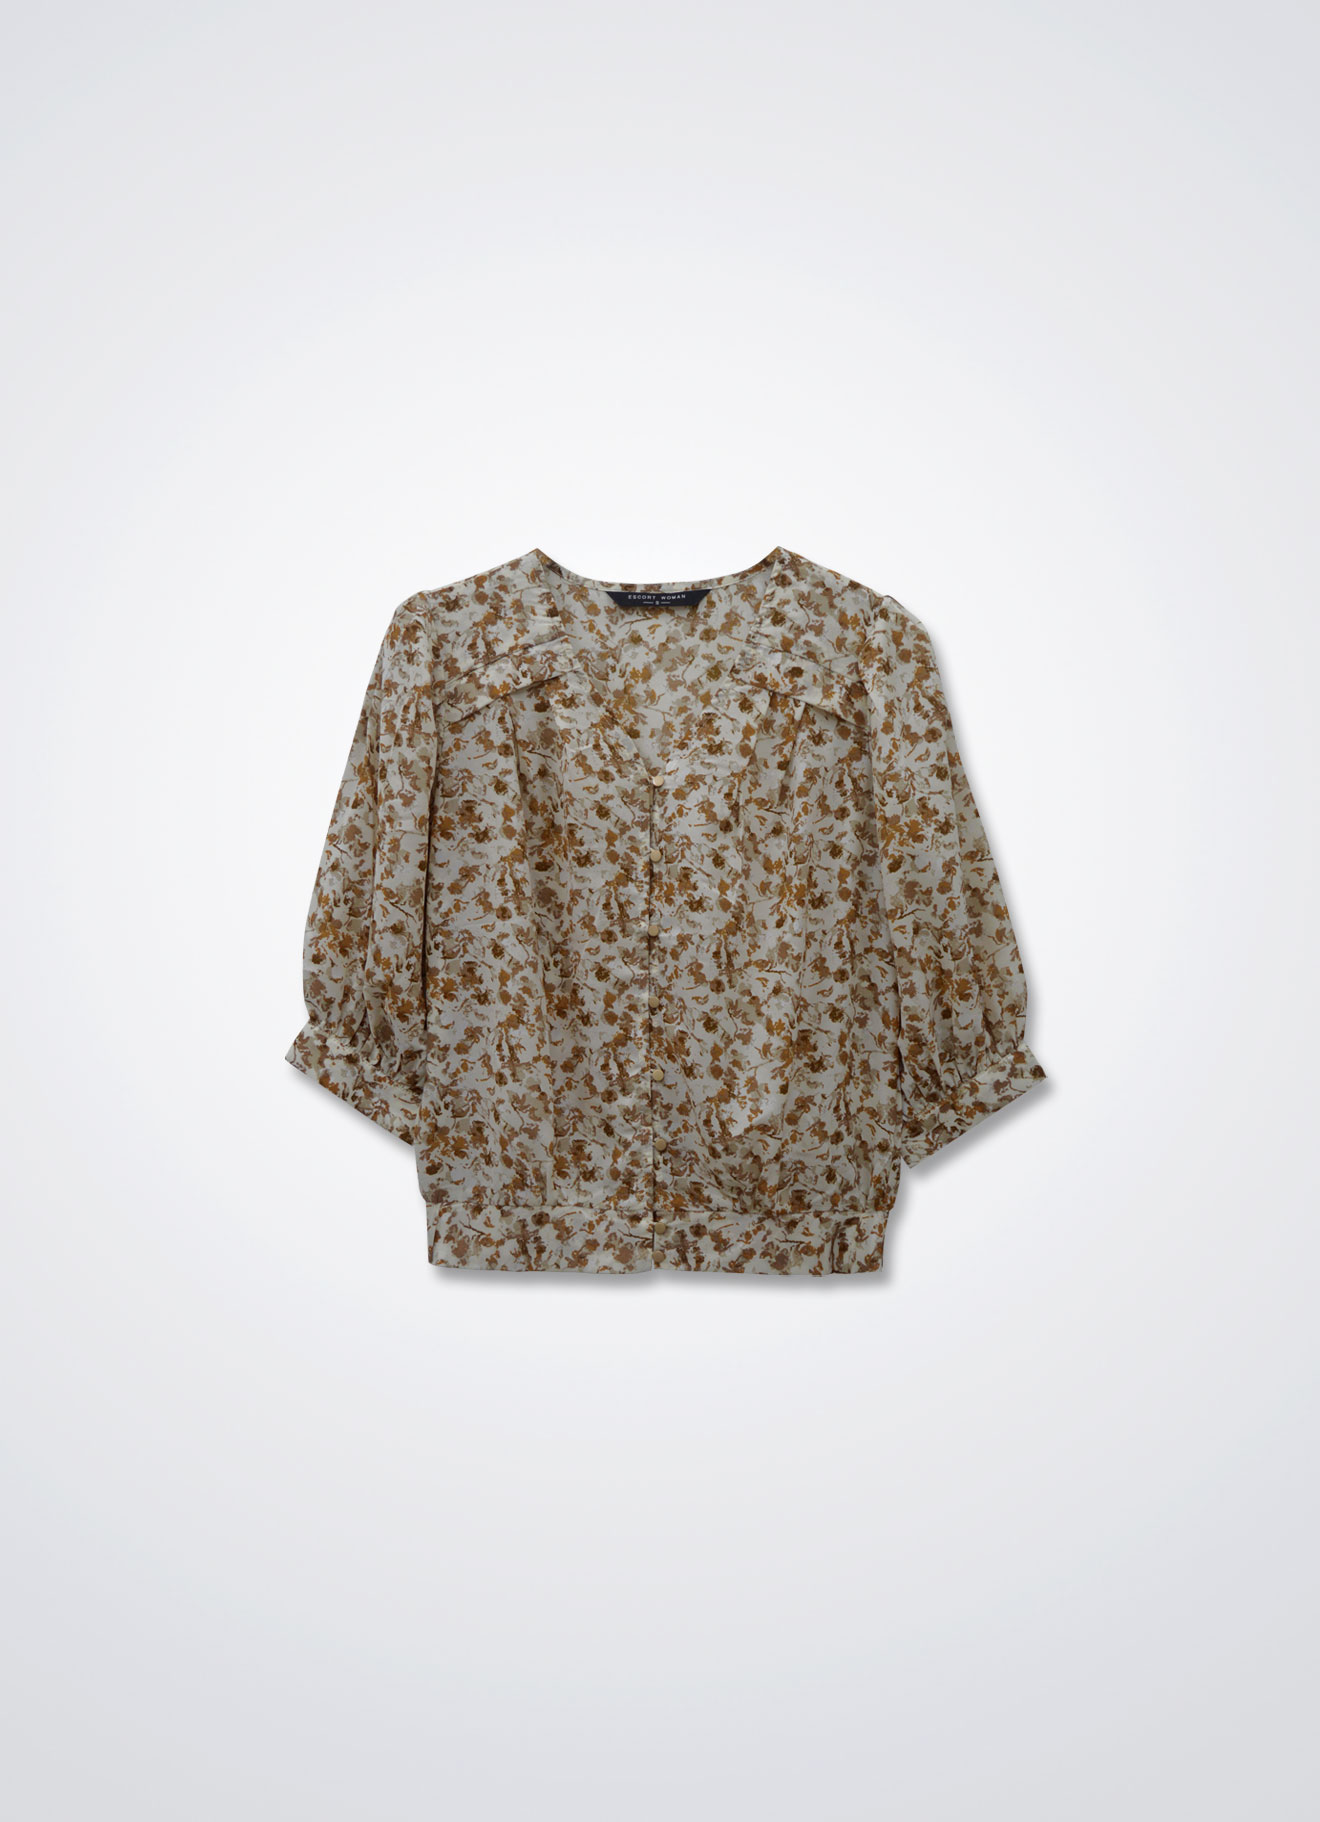 Mocha-Mousse by Floral Printed Blouse